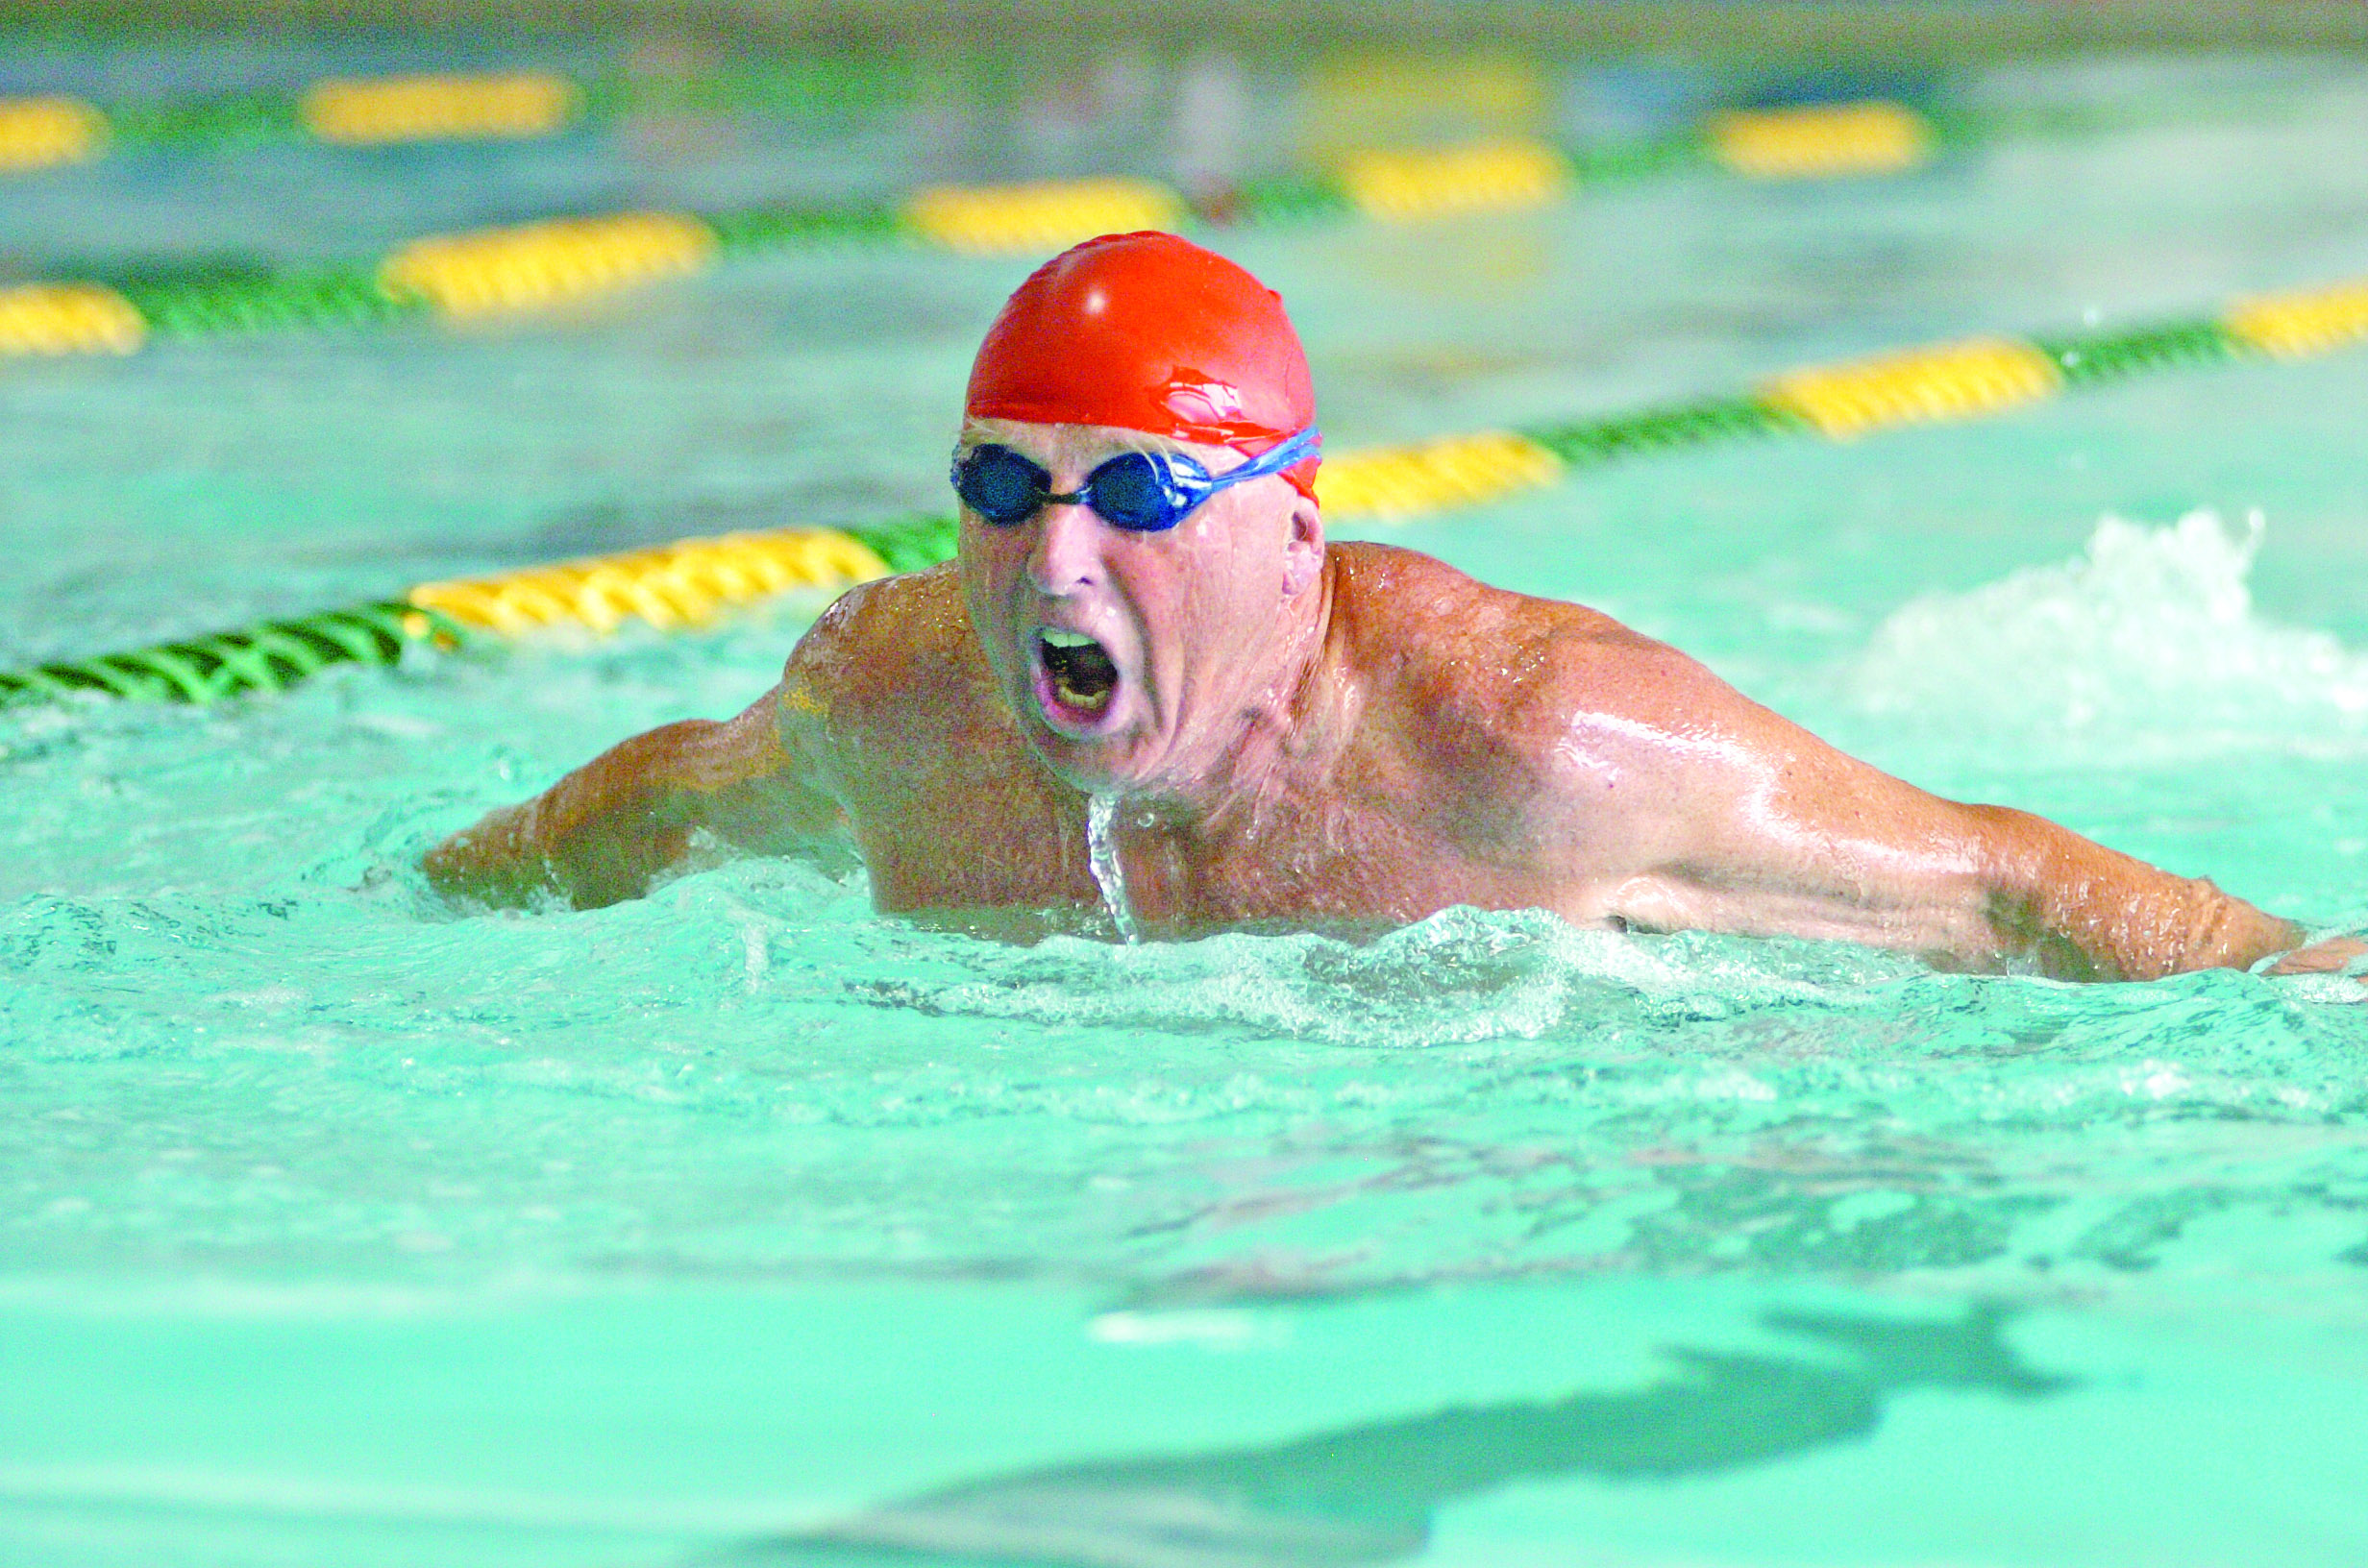 Jack Fritz of Edmonds swims the butterfly at the William Shore Memorial Pool during the 2010 Olympic Peninsula Senior Games. Peninsula Daily News